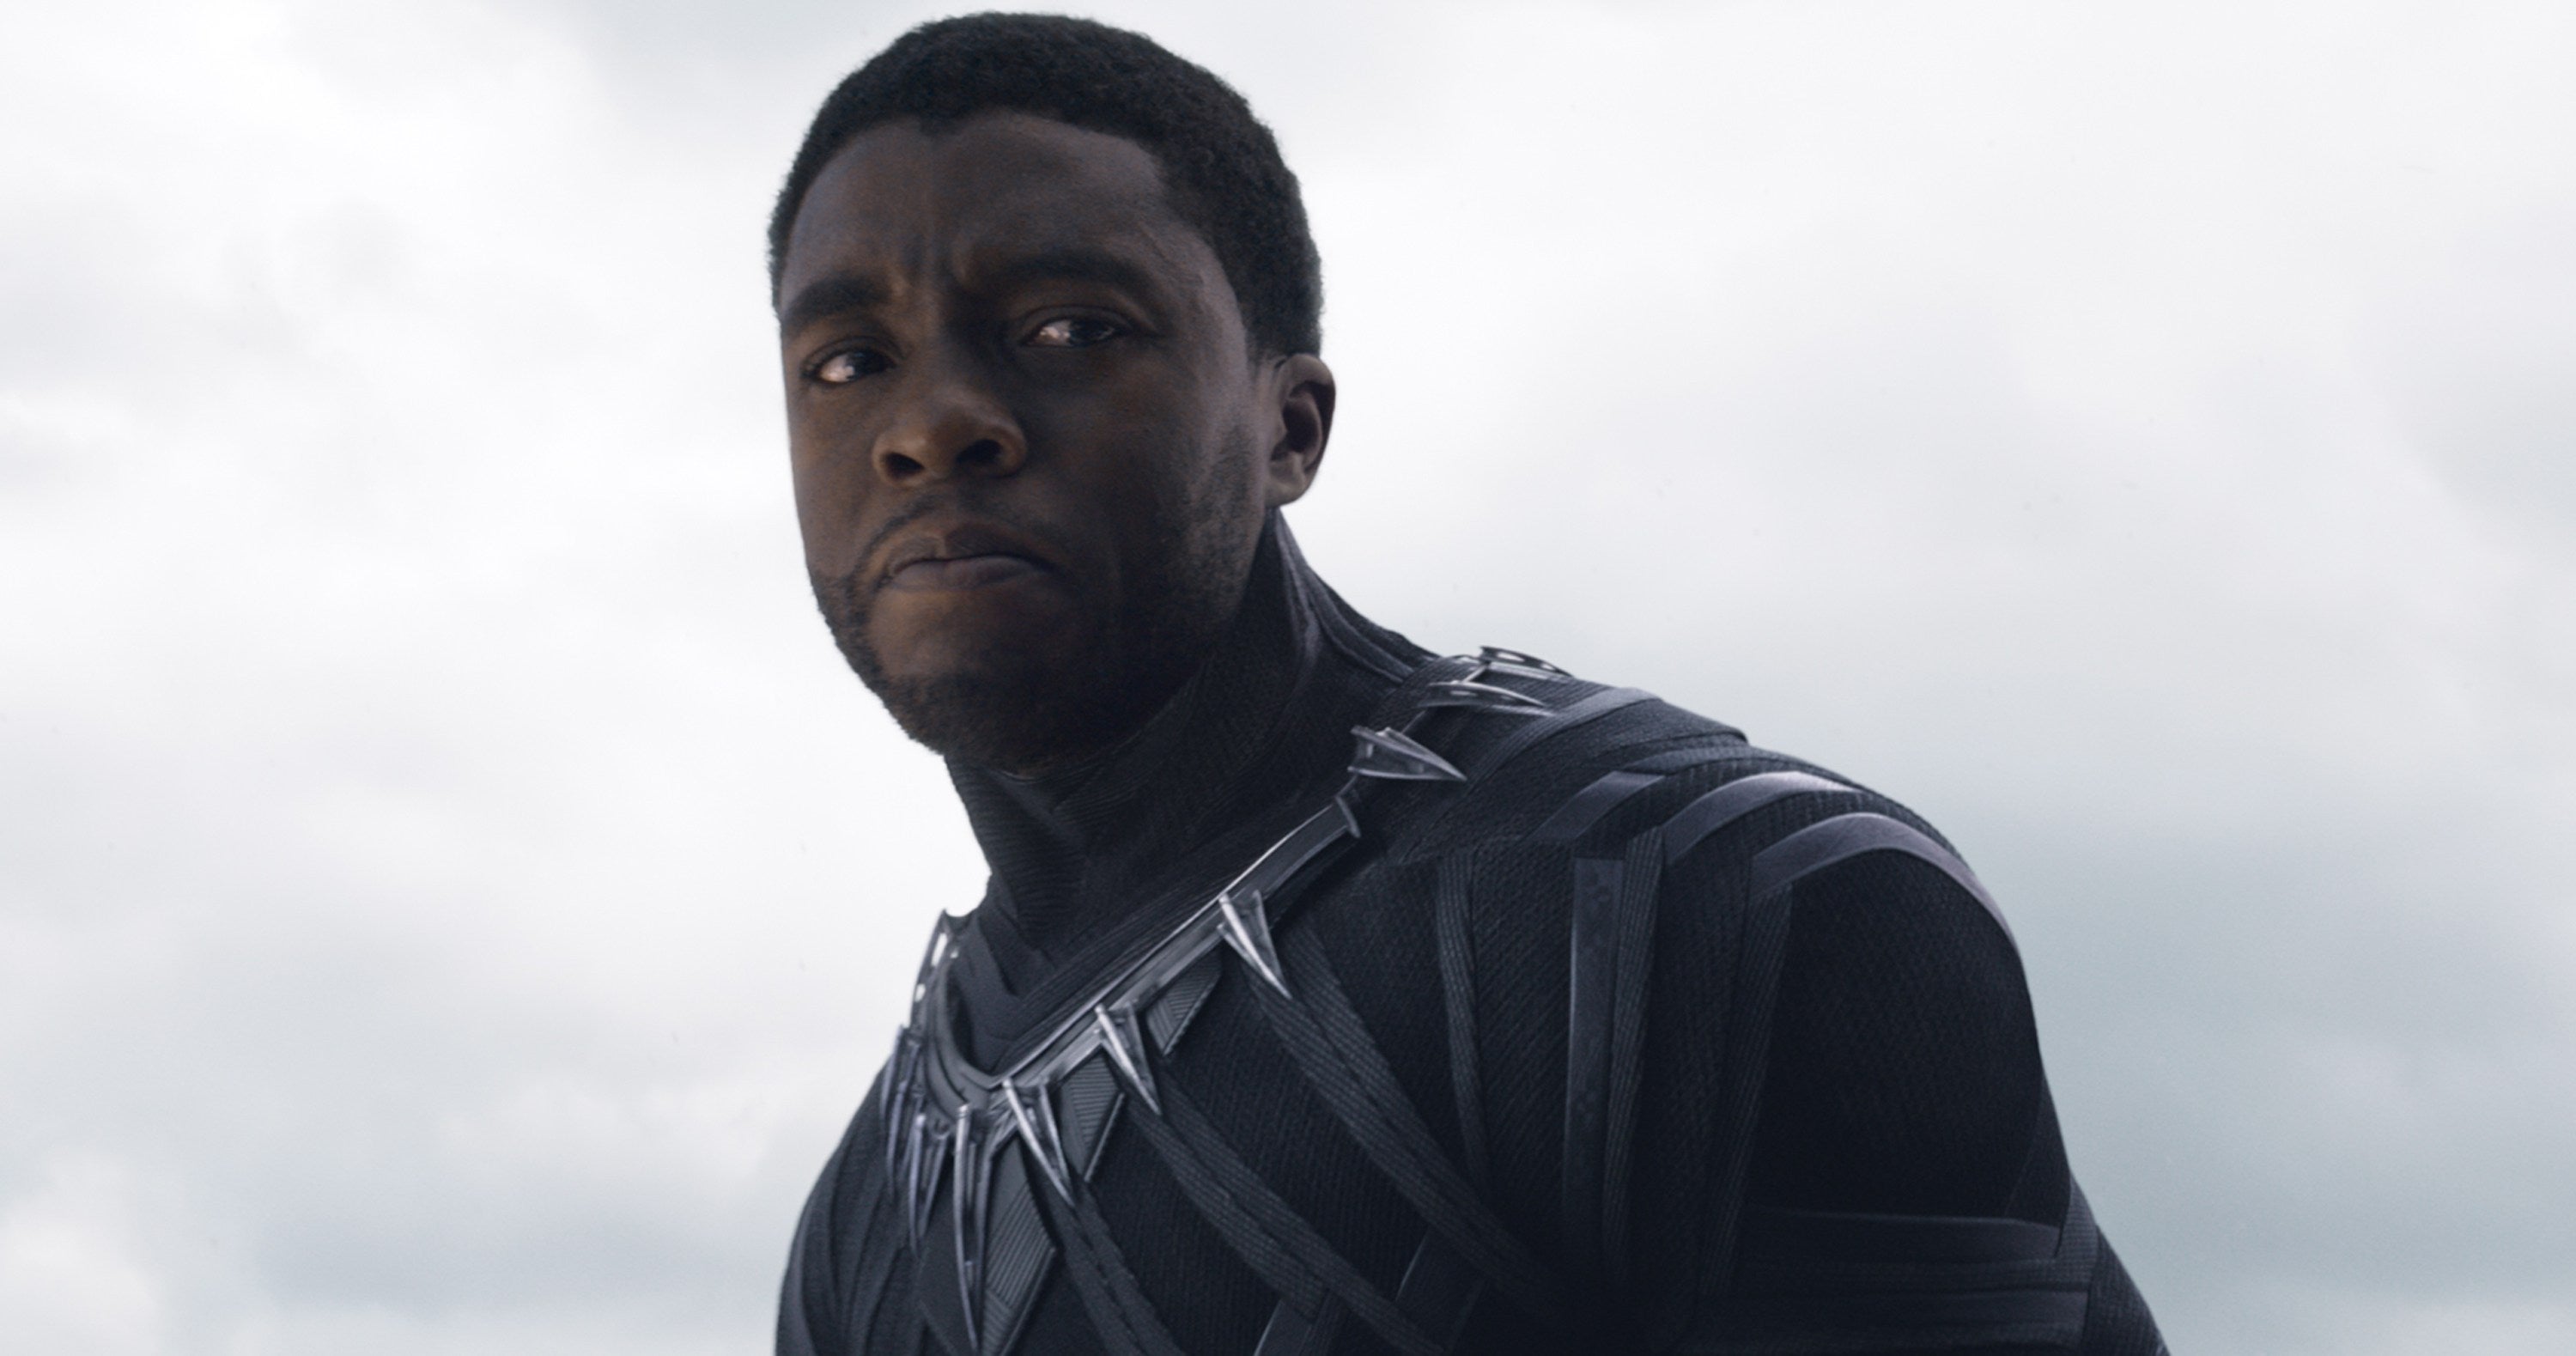 This Petition Wants Marvel To Invest A Portion Of 'Black Panther' Profits In Black Communities
